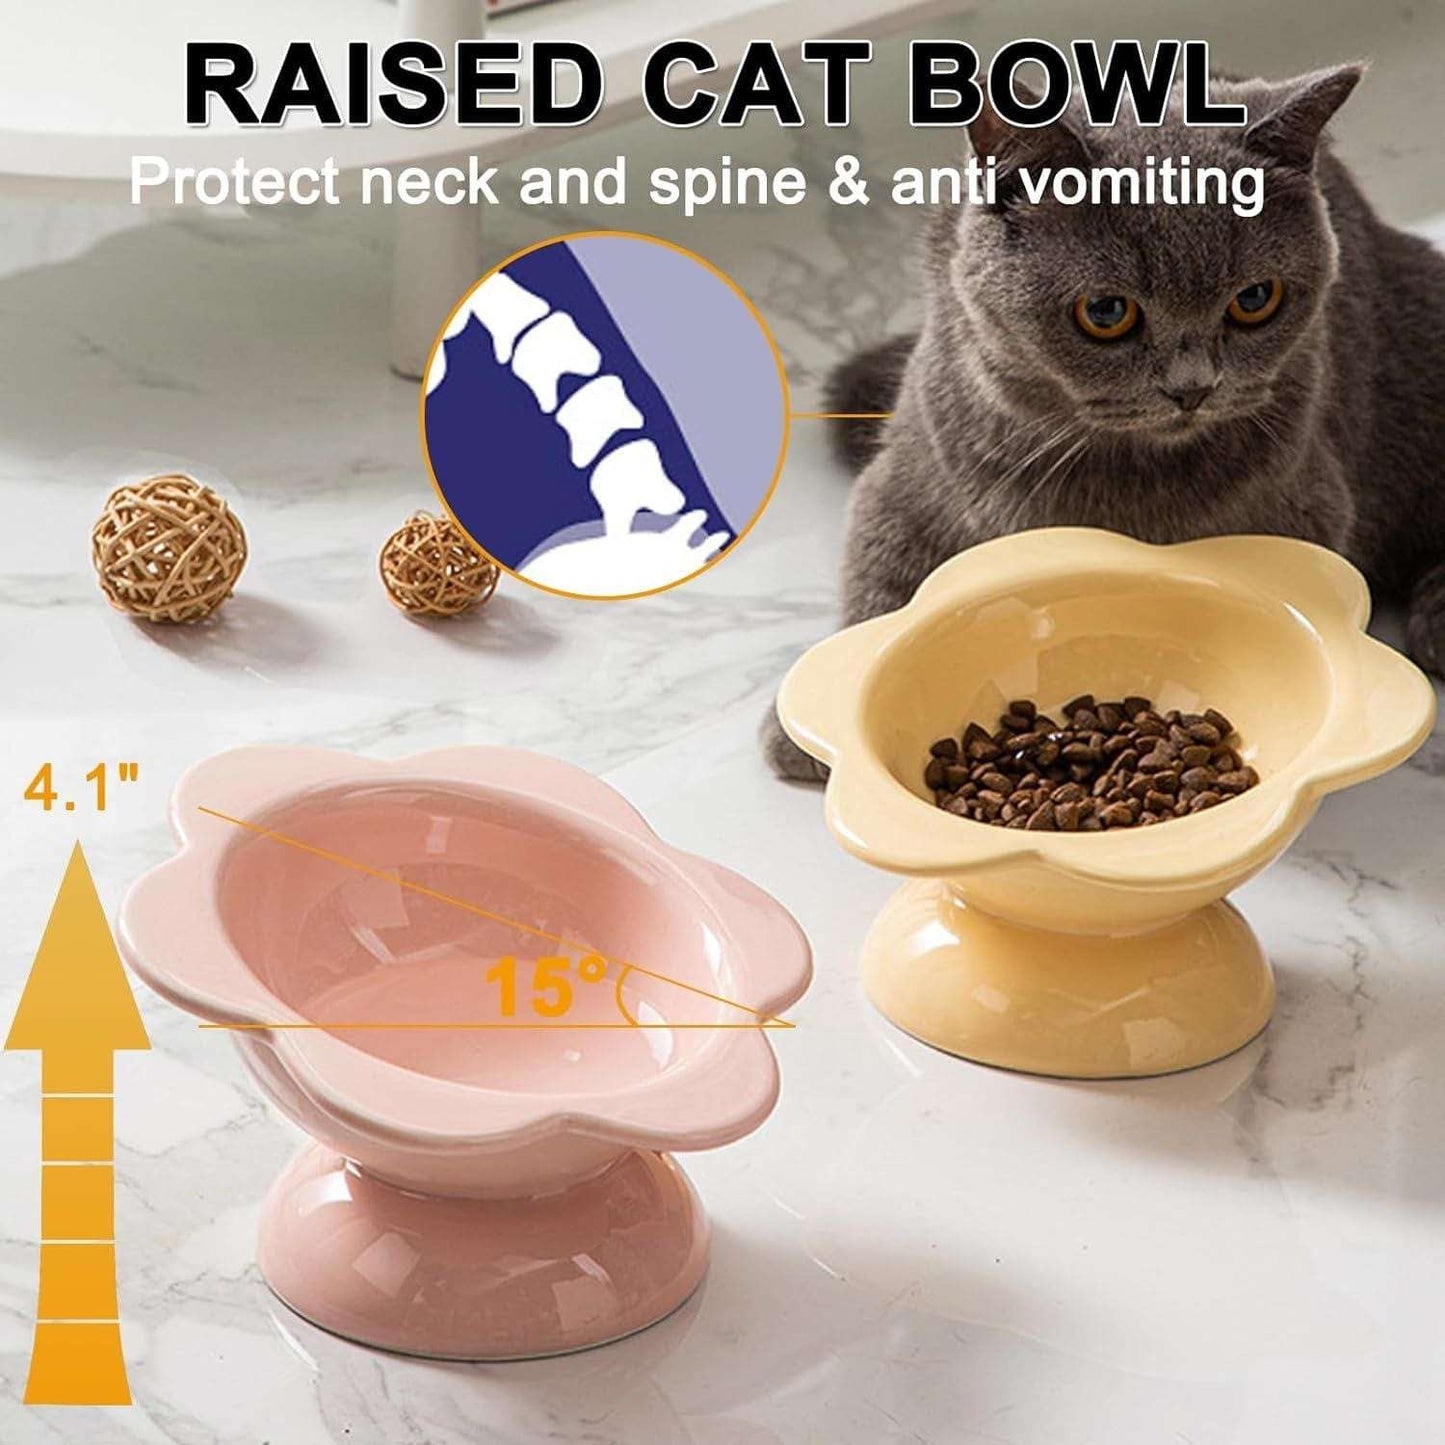 kutkutstyle feeding essentials Wide*Height: 12.5cm*10.4cm KUTKUT 2Pack Ceramic Raised Cat Food Bowl, Tilted Flower Shaped Food or Water Bowl for Cats and Small Dogs, Anti Vomiting Pet Feeder Dish Whisker Fatigue Cat Bowl (Capacity: 200ML)